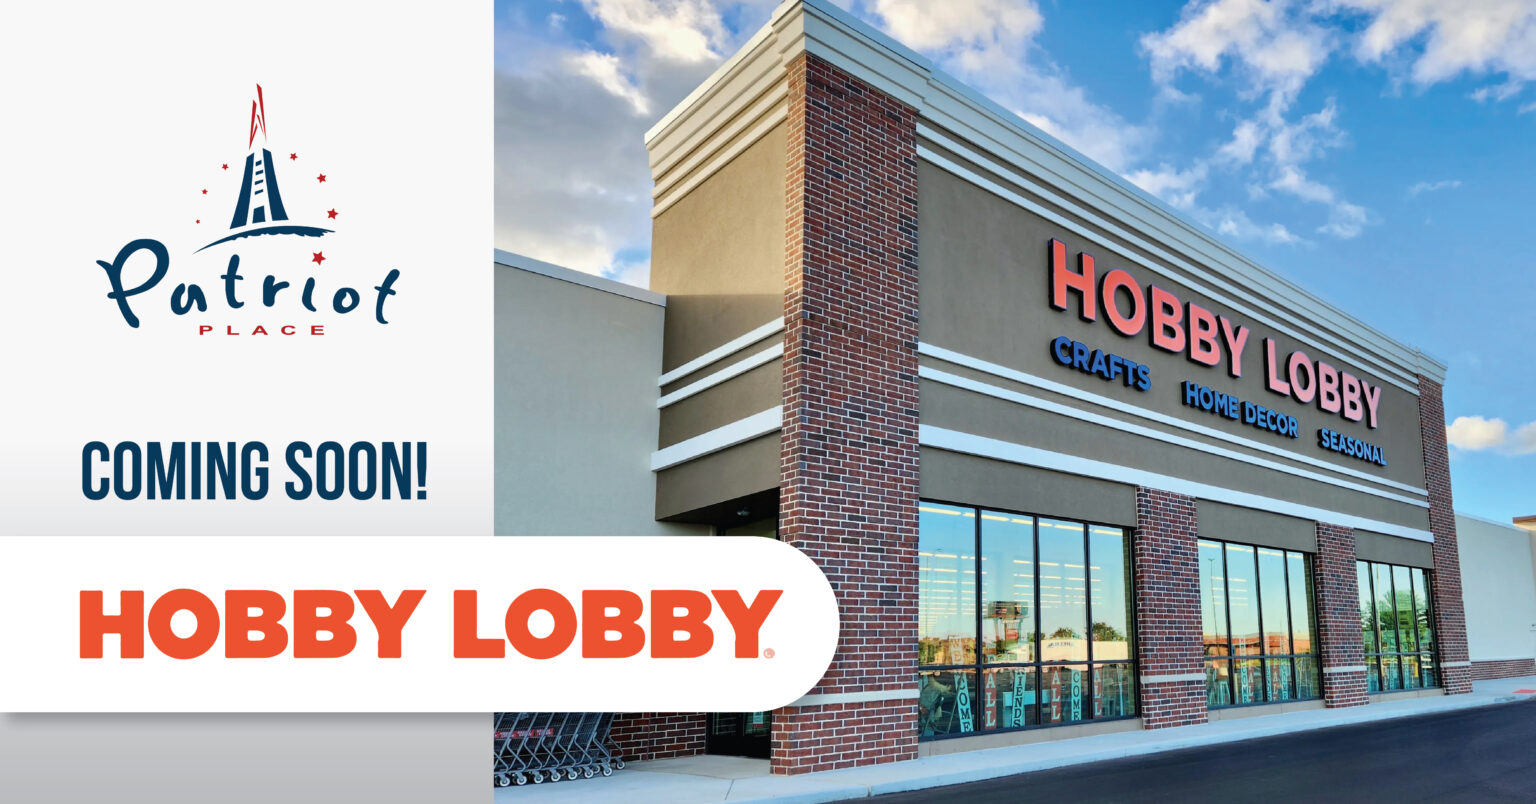 BLACKLINE Announces Hobby Lobby Coming Soon to Patriot Place